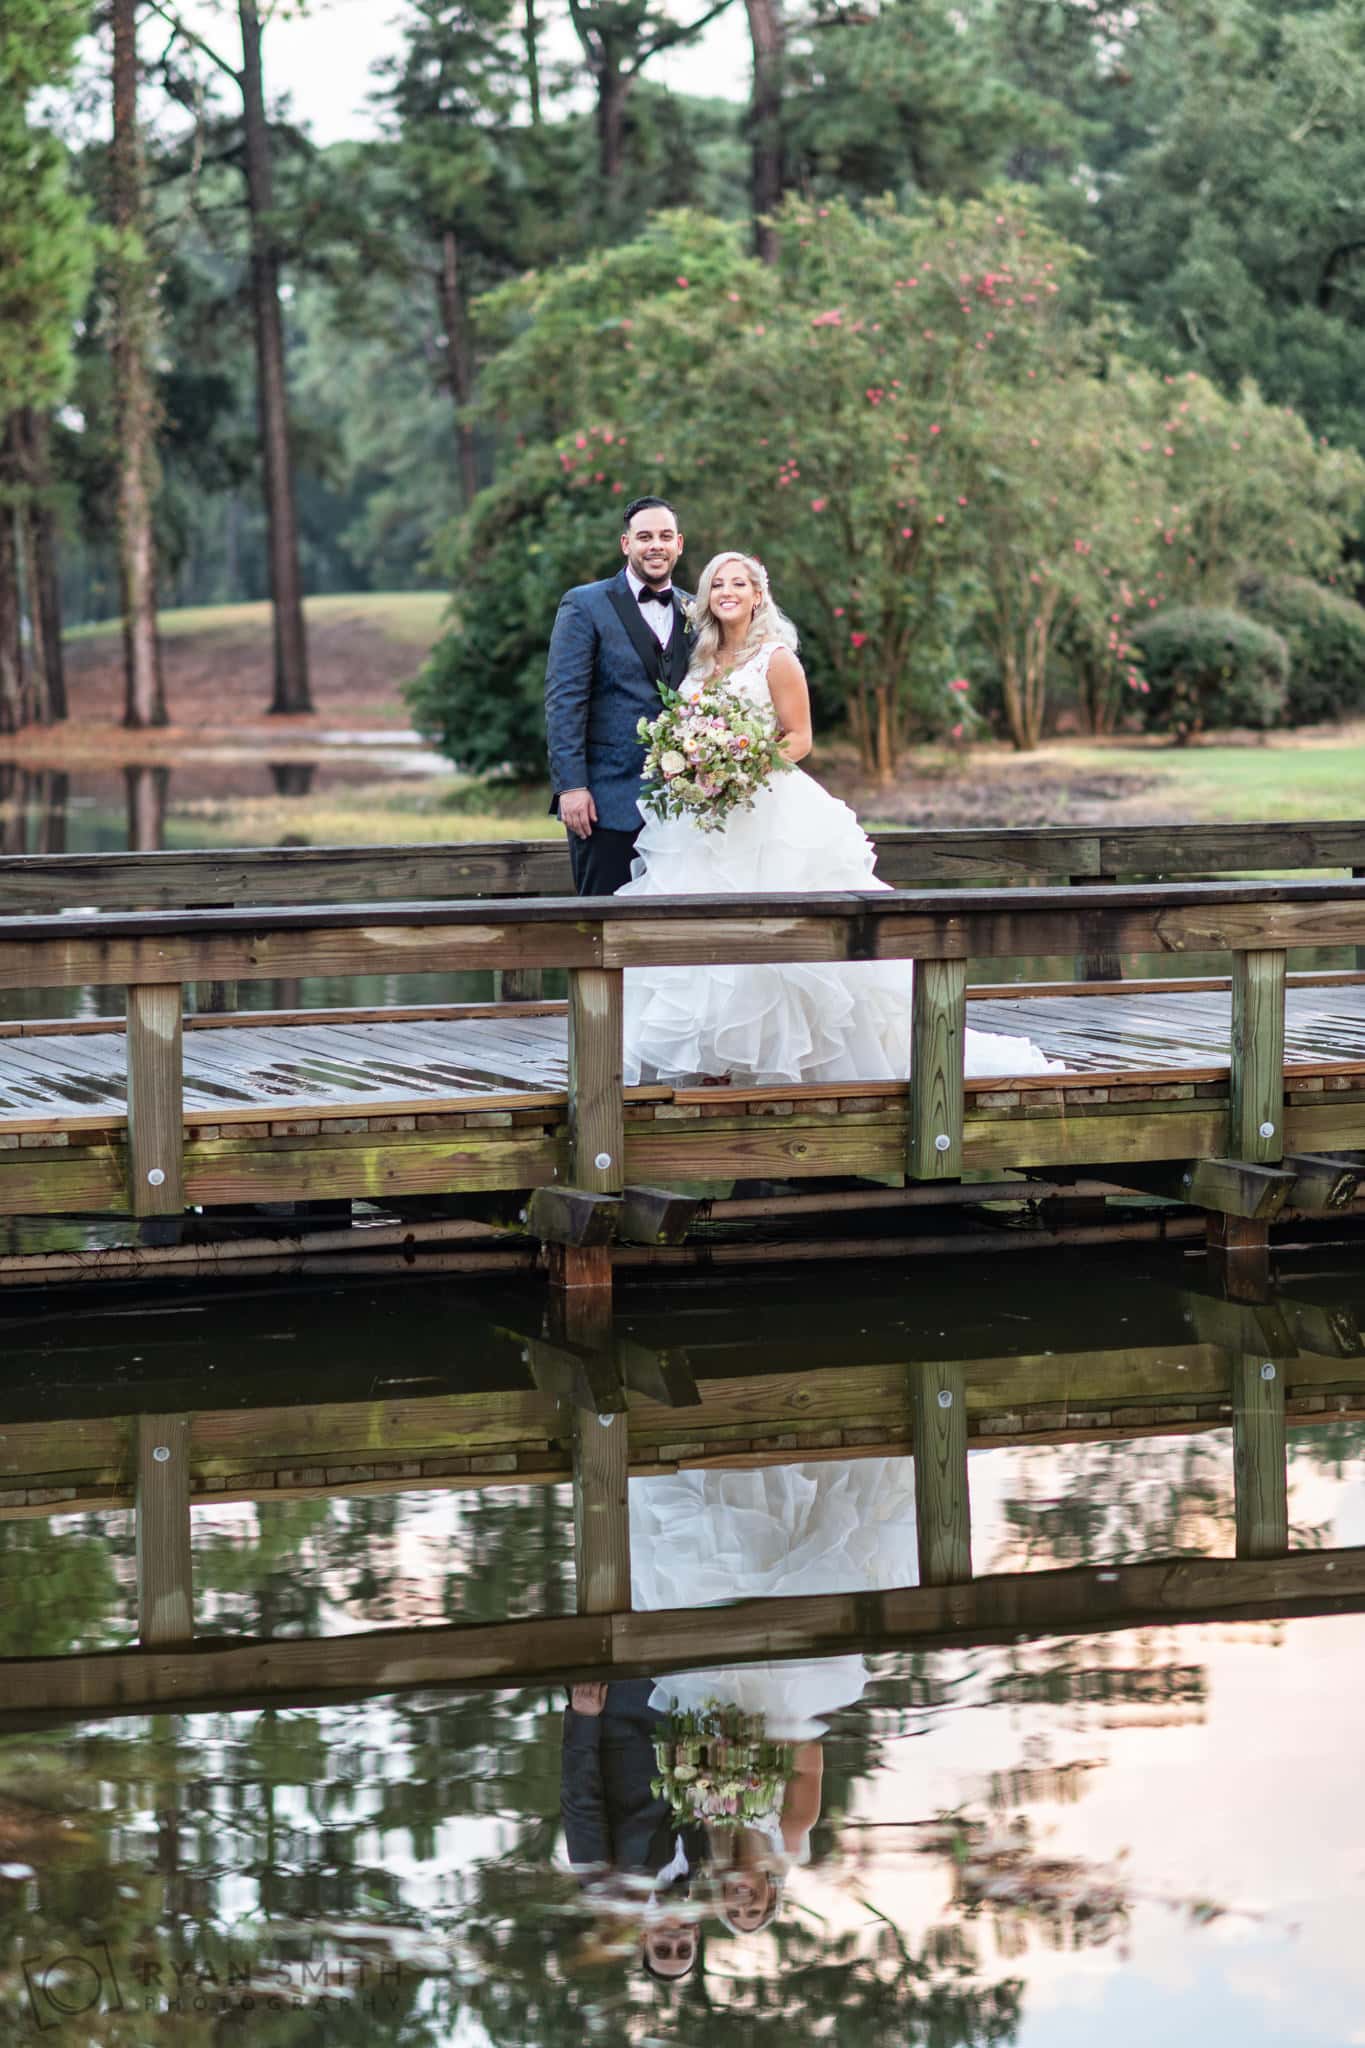 Bride and groom standing on the bridge reflecting in the water - Litchfield Country Club